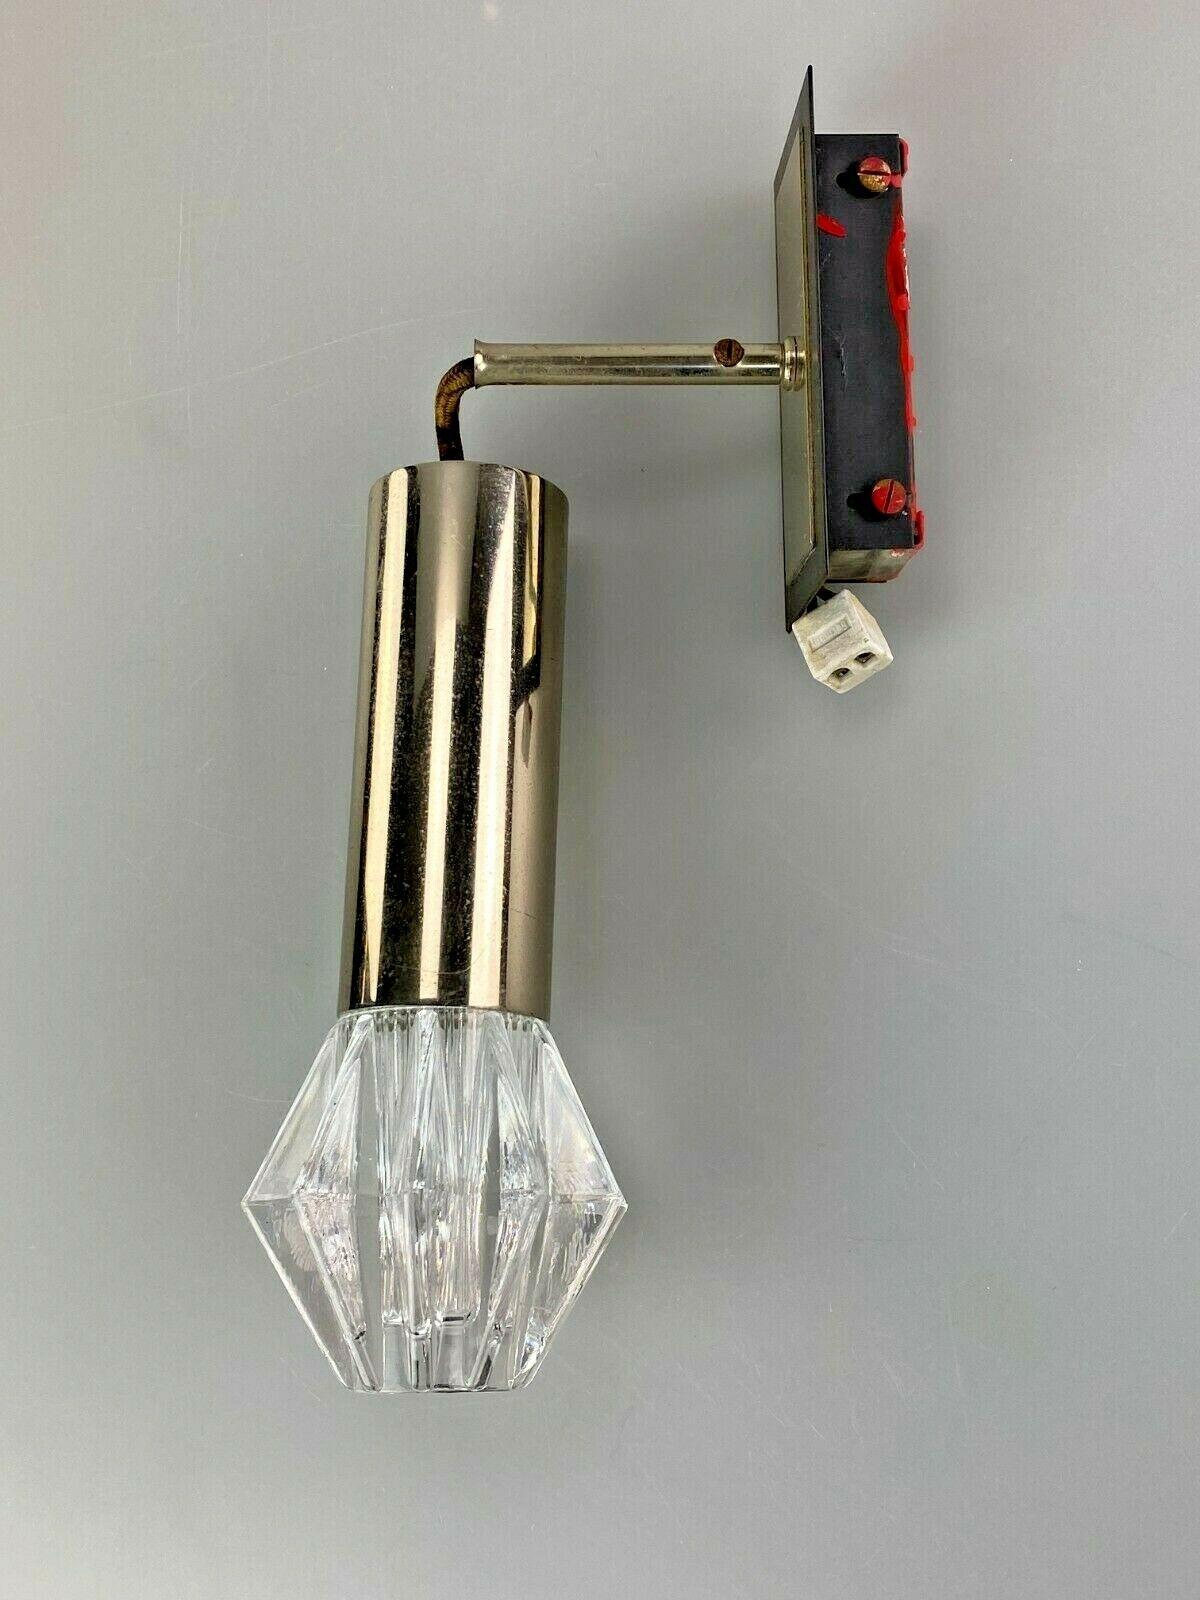 60s 70s lamp light wall lamp chrome glass space age design 60s 70s

Object: wall lamp

Manufacturer:

Condition: good

Age: around 1960-1970

Dimensions:

17cm x 8.5cm x 30cm

Other notes:

The pictures serve as part of the